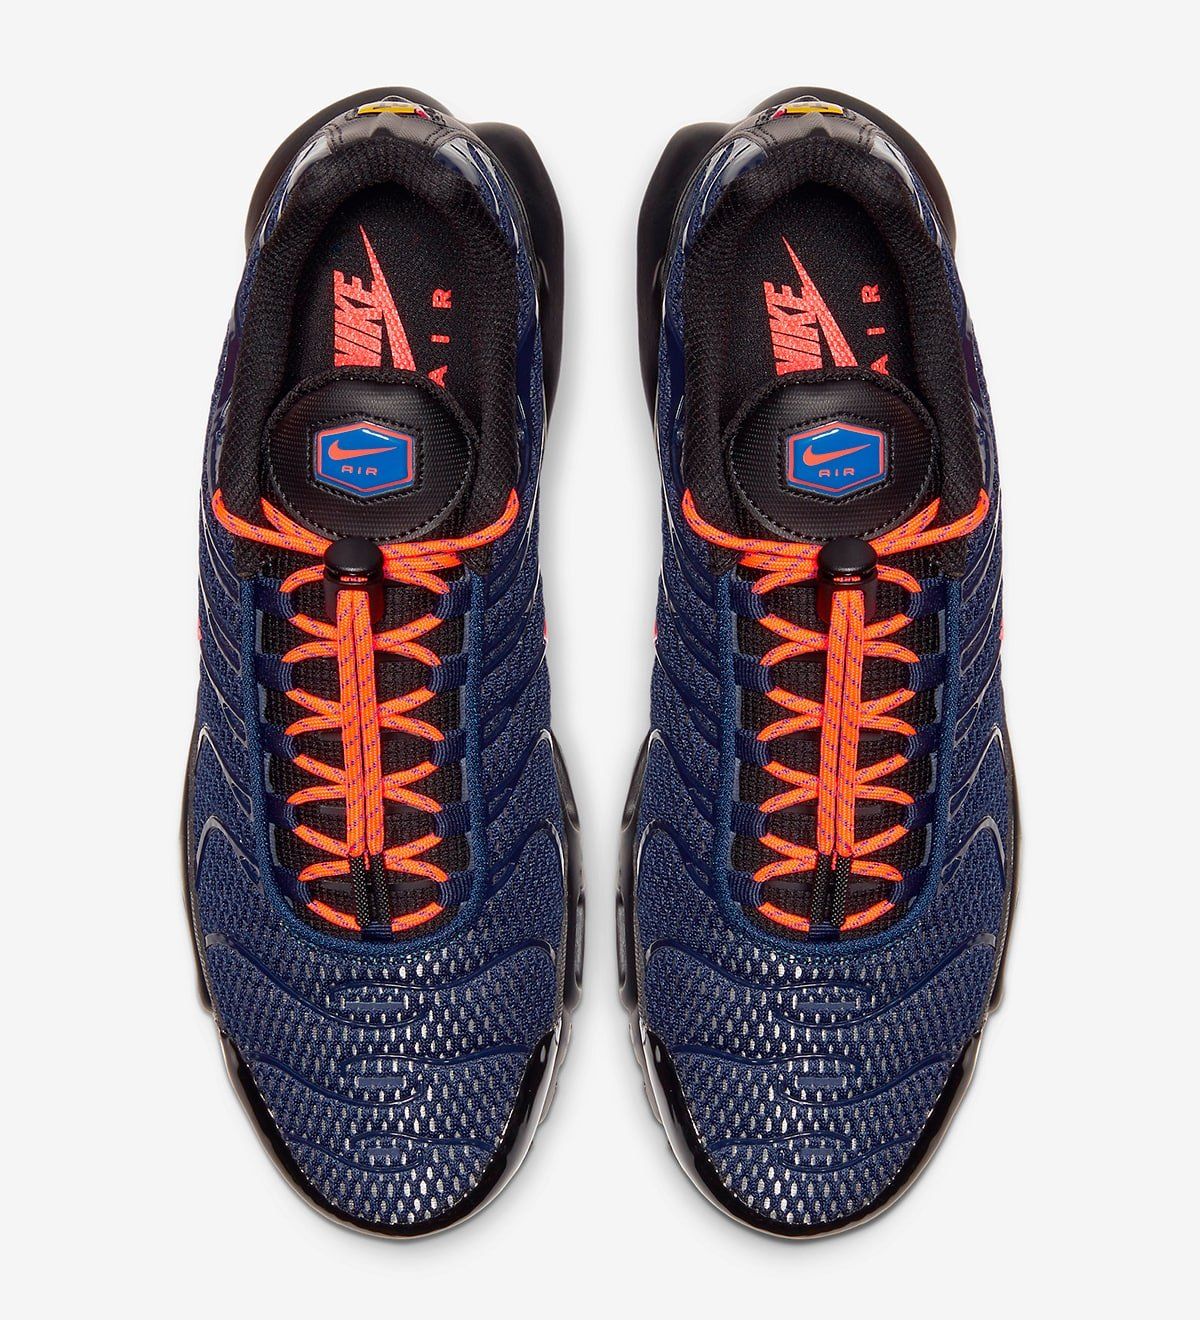 Nike Add Toggles to the Tn | HOUSE OF HEAT